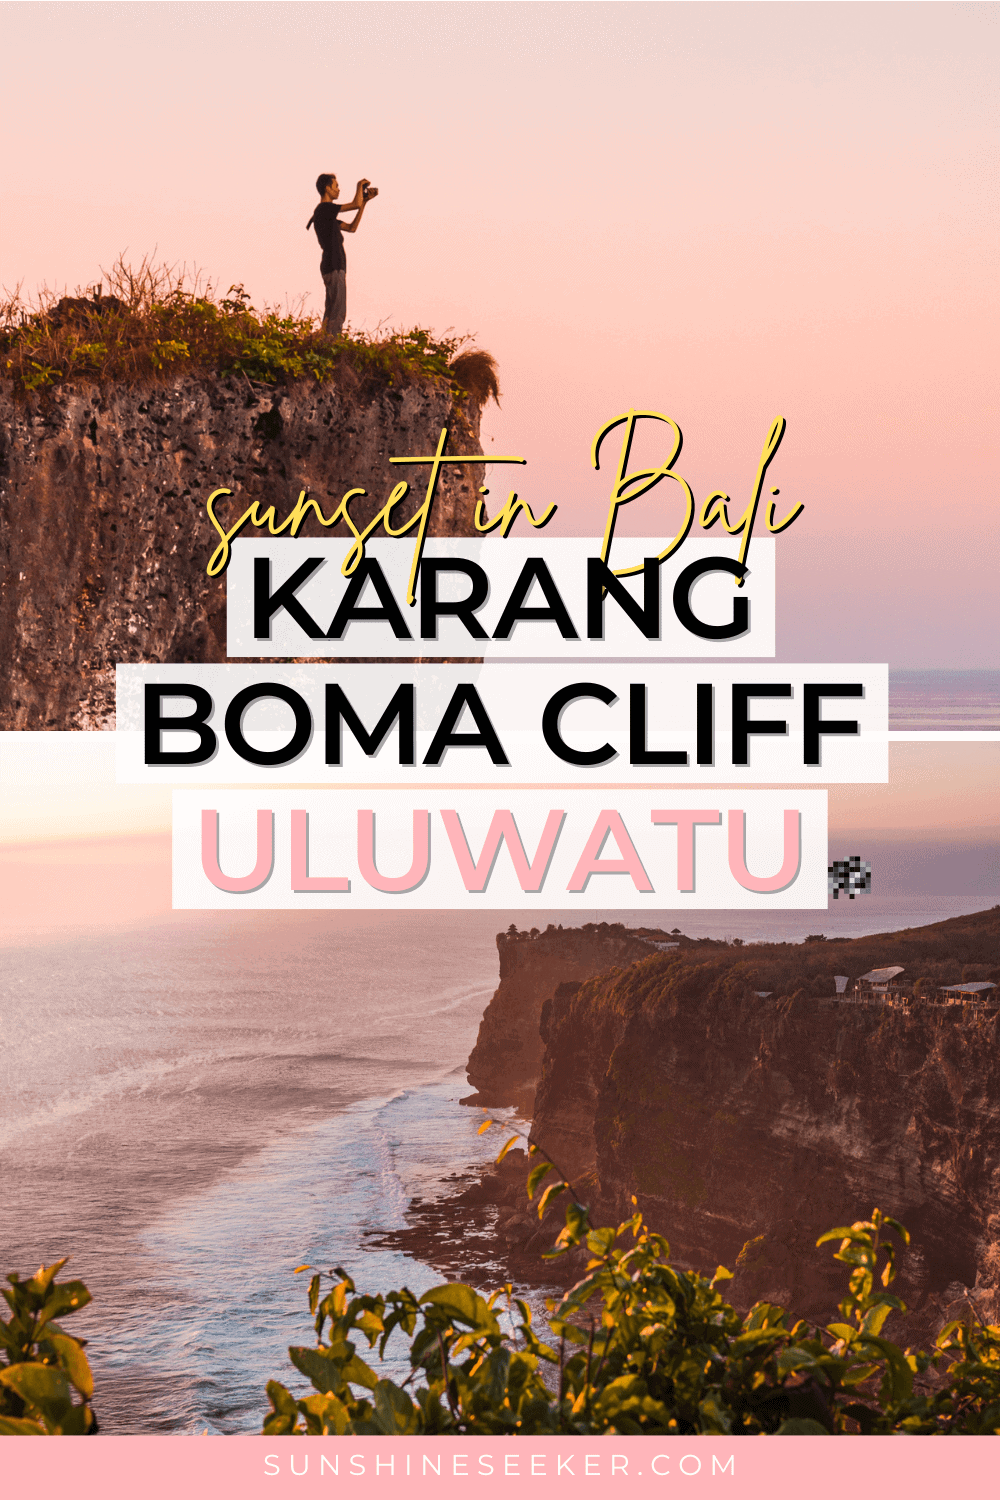 Don't miss the incredible sunset viewpoint Karang Boma Cliff in Uluwatu, Bali. How to get there, what to expect + photography tips. Karang Boma Cliff, the best sunset in Uluwatu.